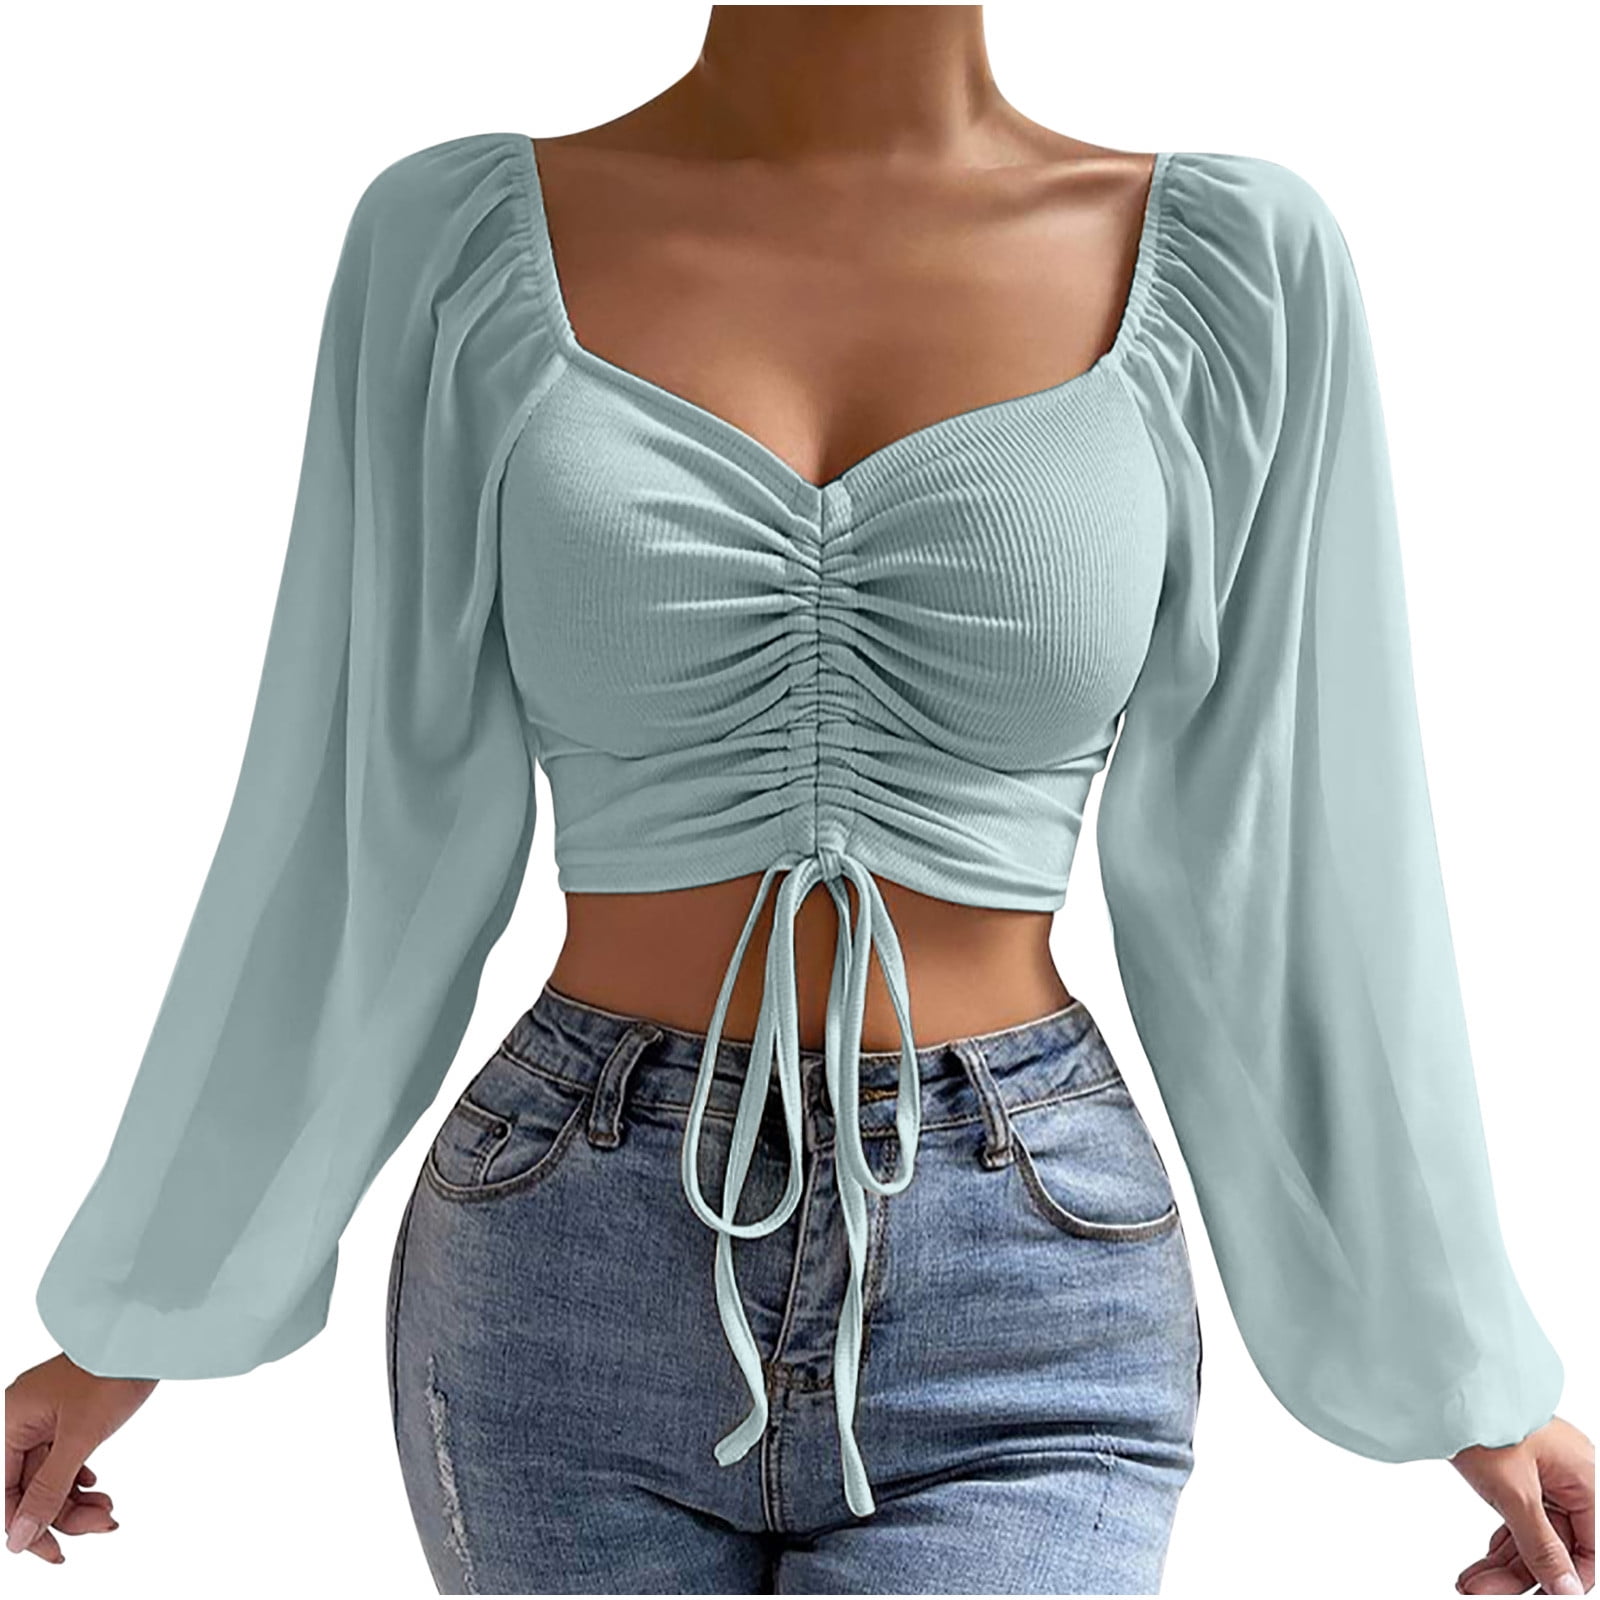 HTNBO Cute Crop Tops for Women Summer Fall Trends Lattern Long Sleeve Floral  Casual Cami Shirts 